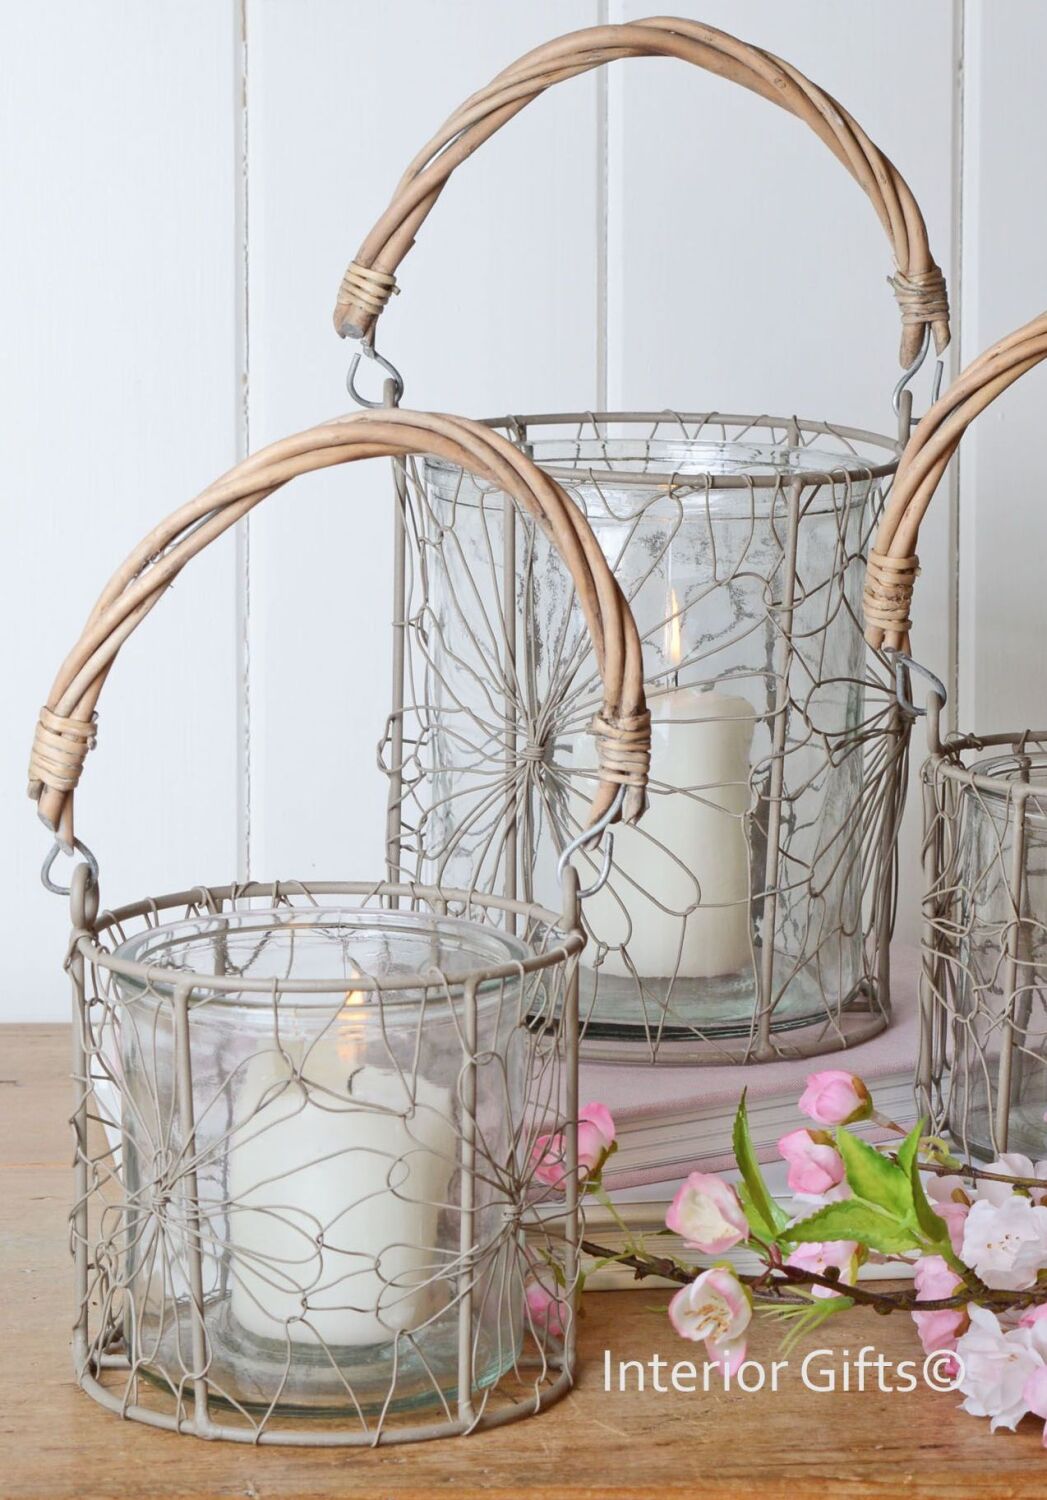 Set of Three Rustic Glass & Wire Decorative Lanterns with Natural Handle